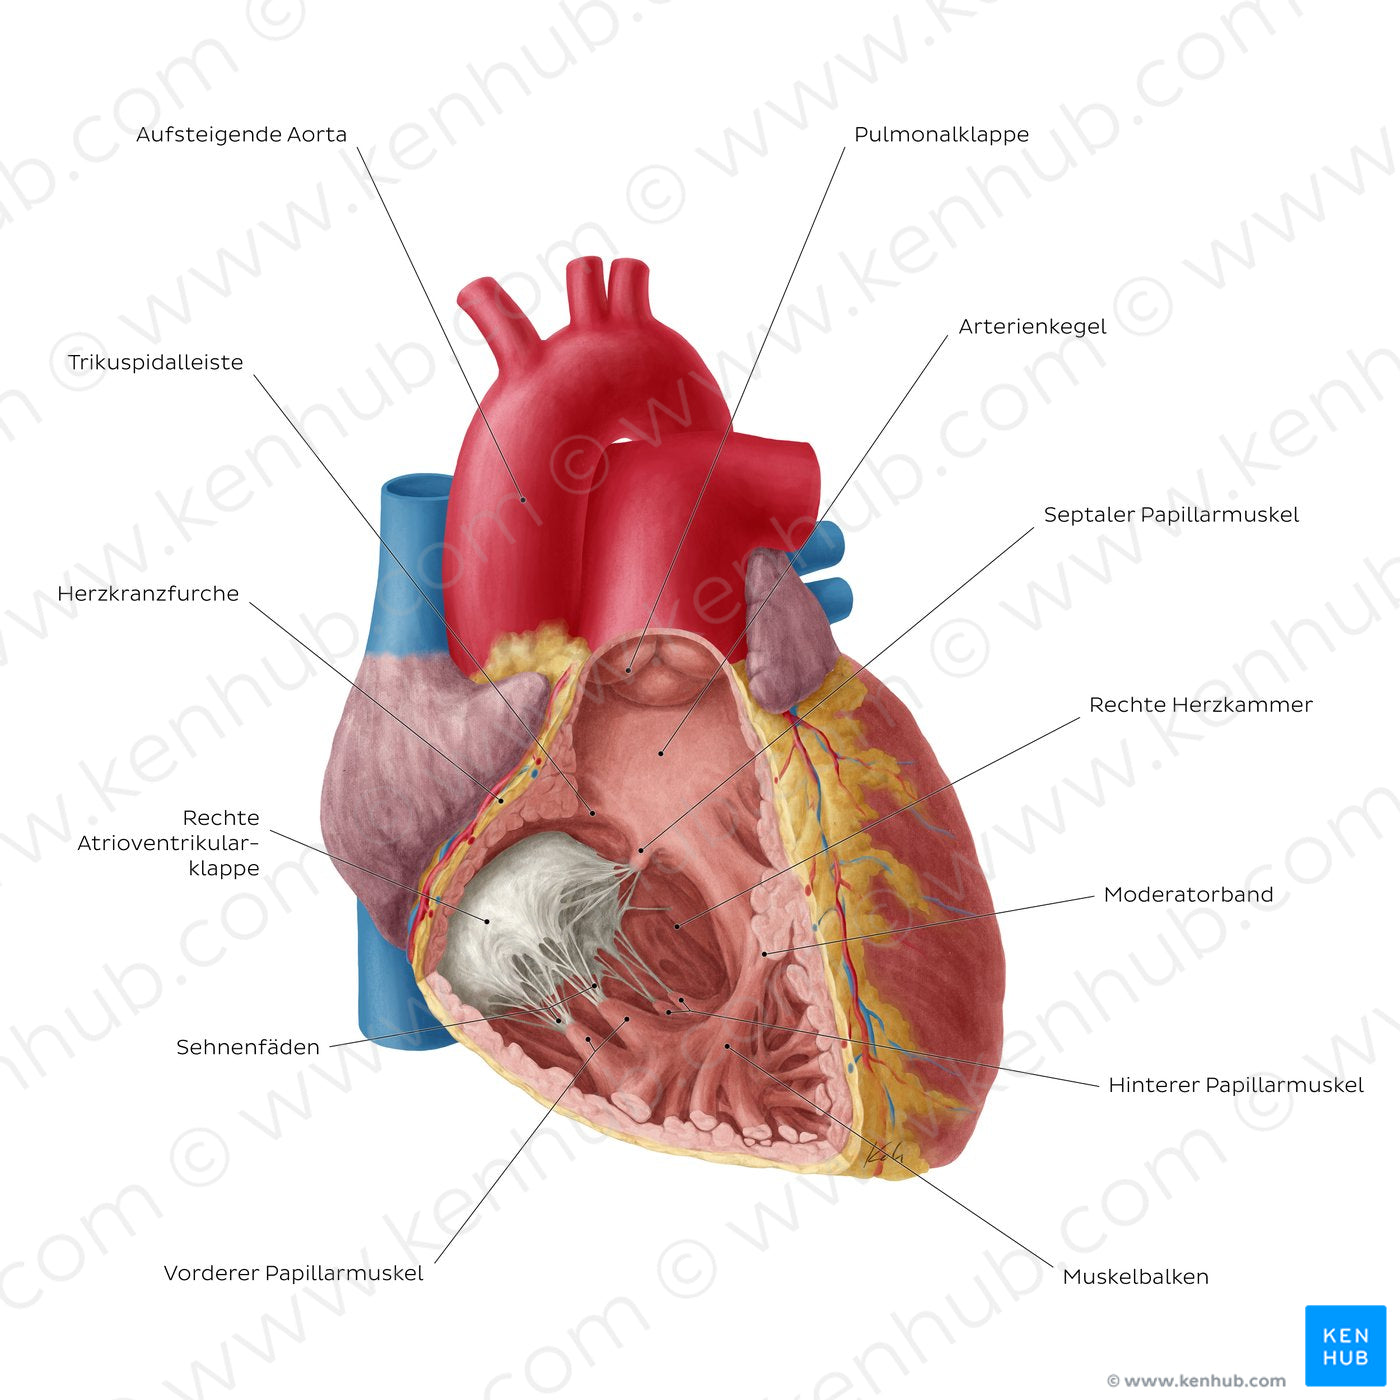 Heart: Right ventricle (German)